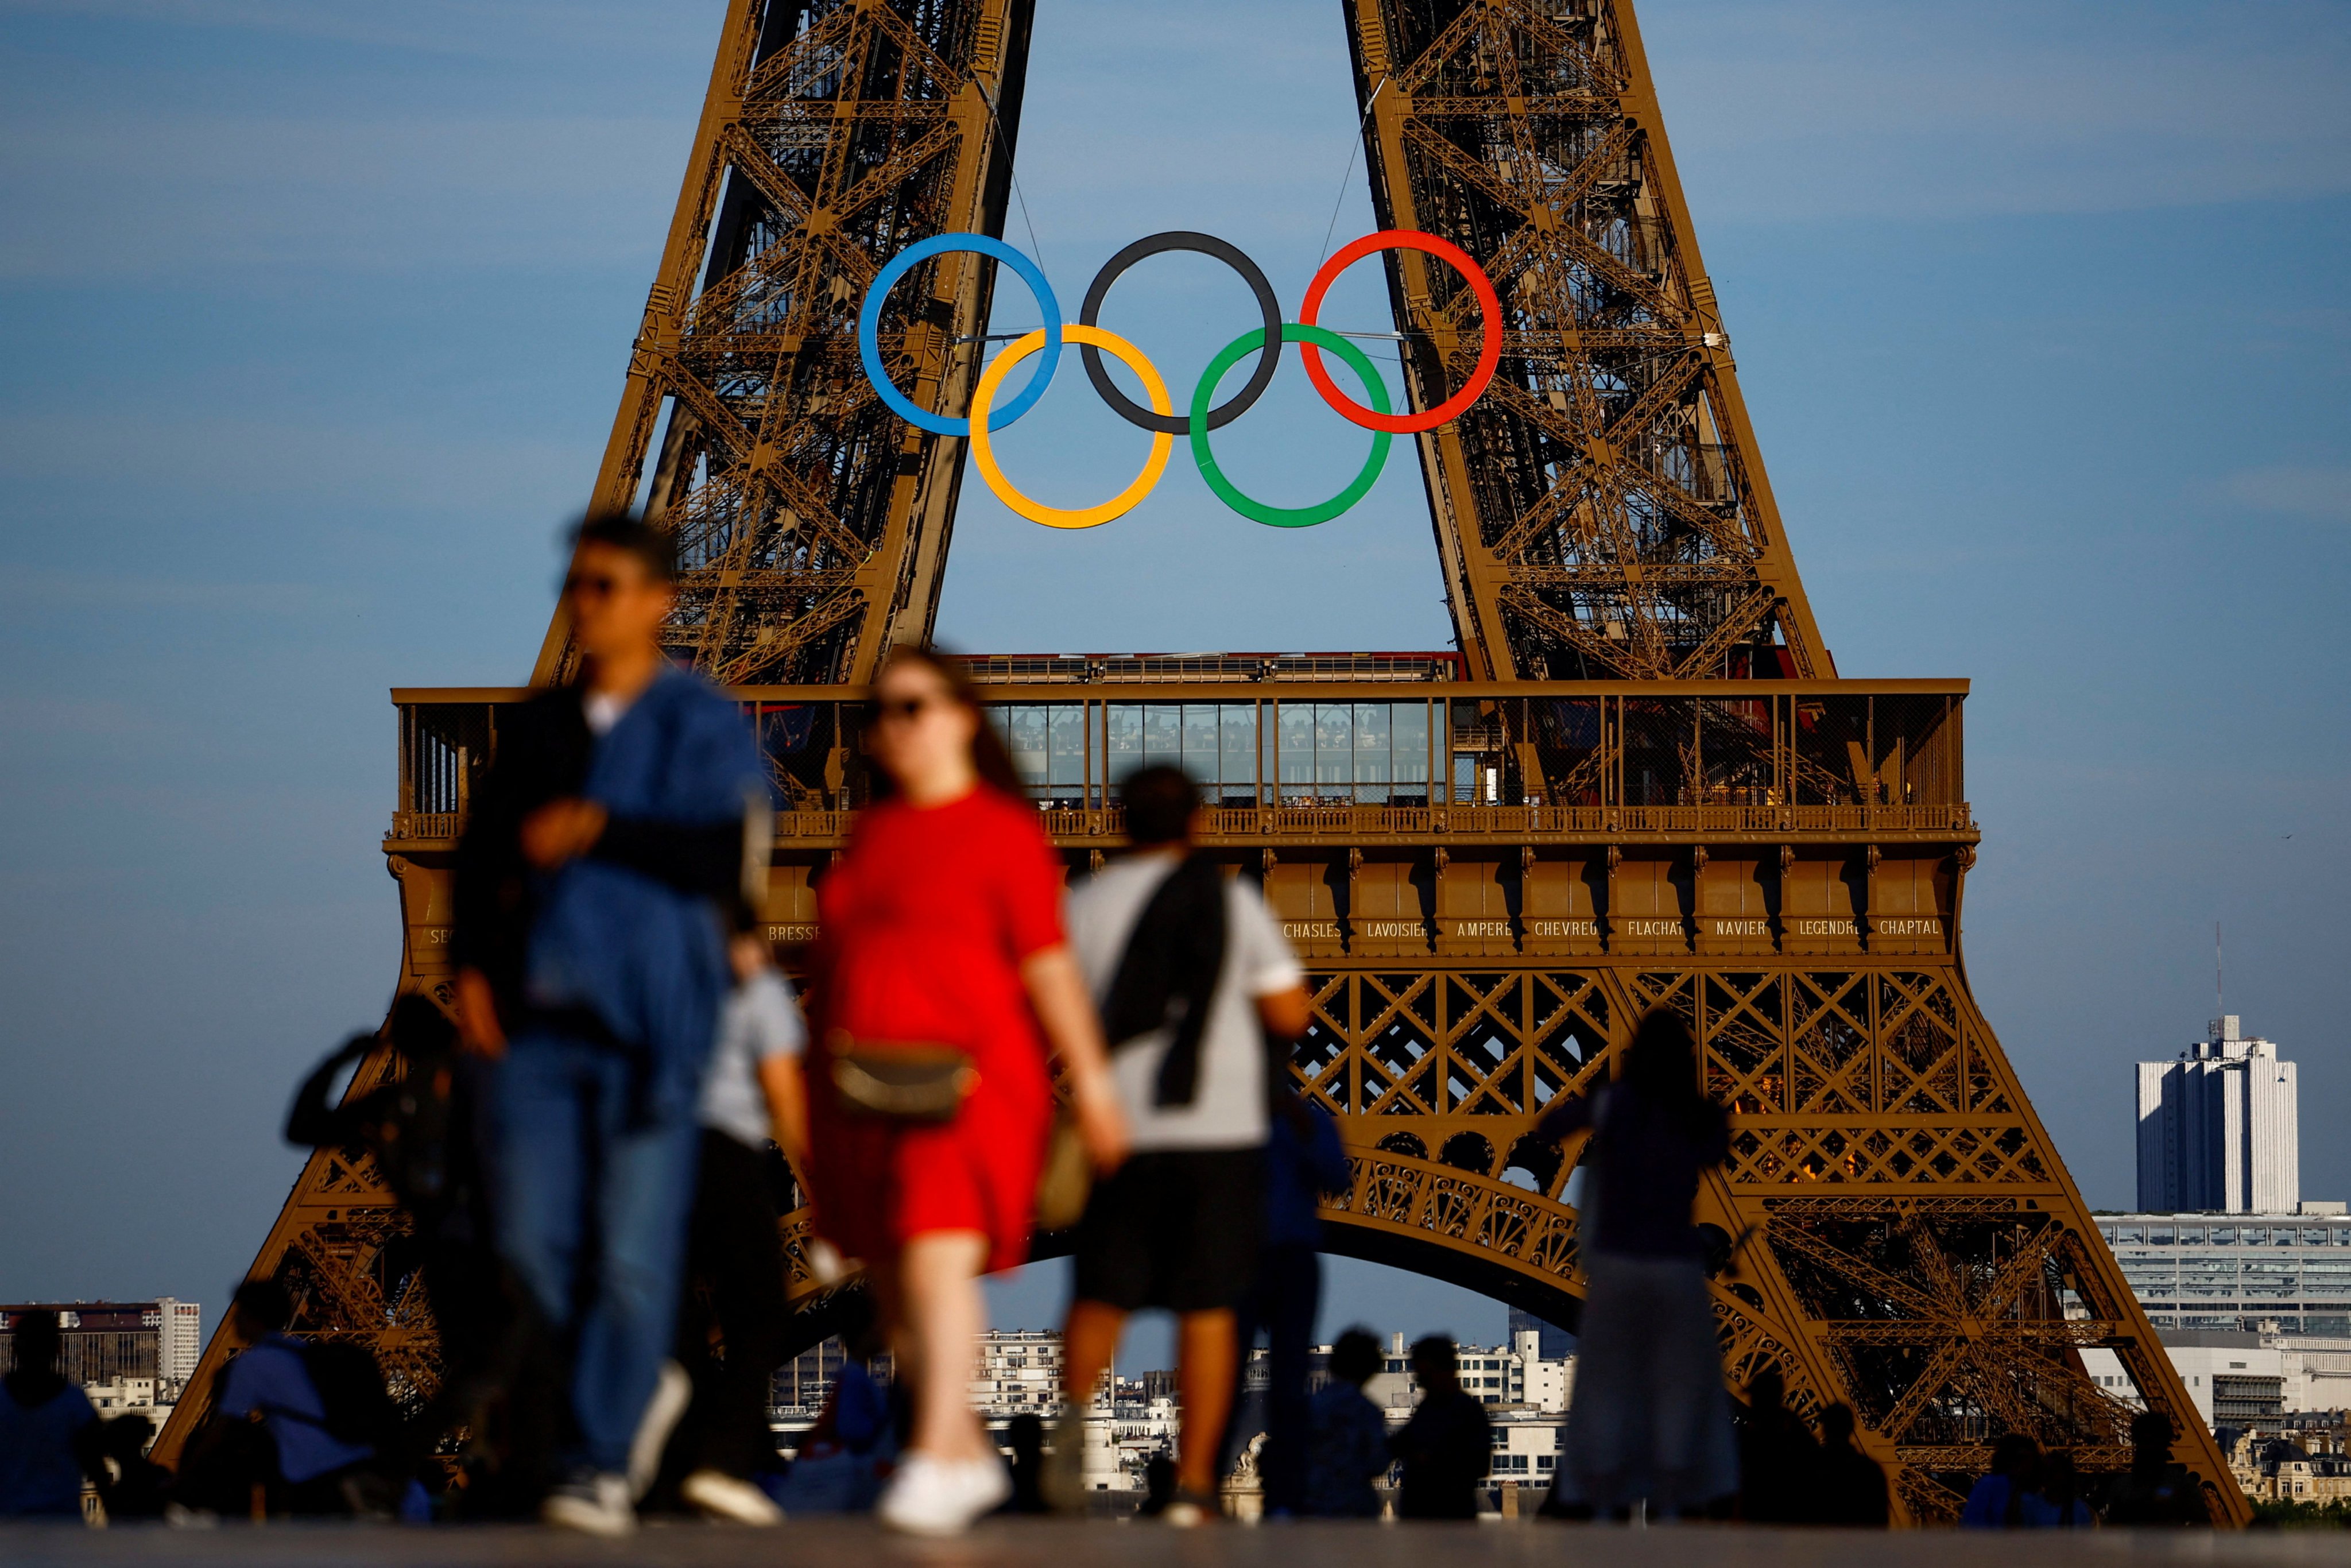 The world-famous Eiffel Tower welcomes visitors to Paris for the 2024 Summer Olympic Games. Photo: Reuters